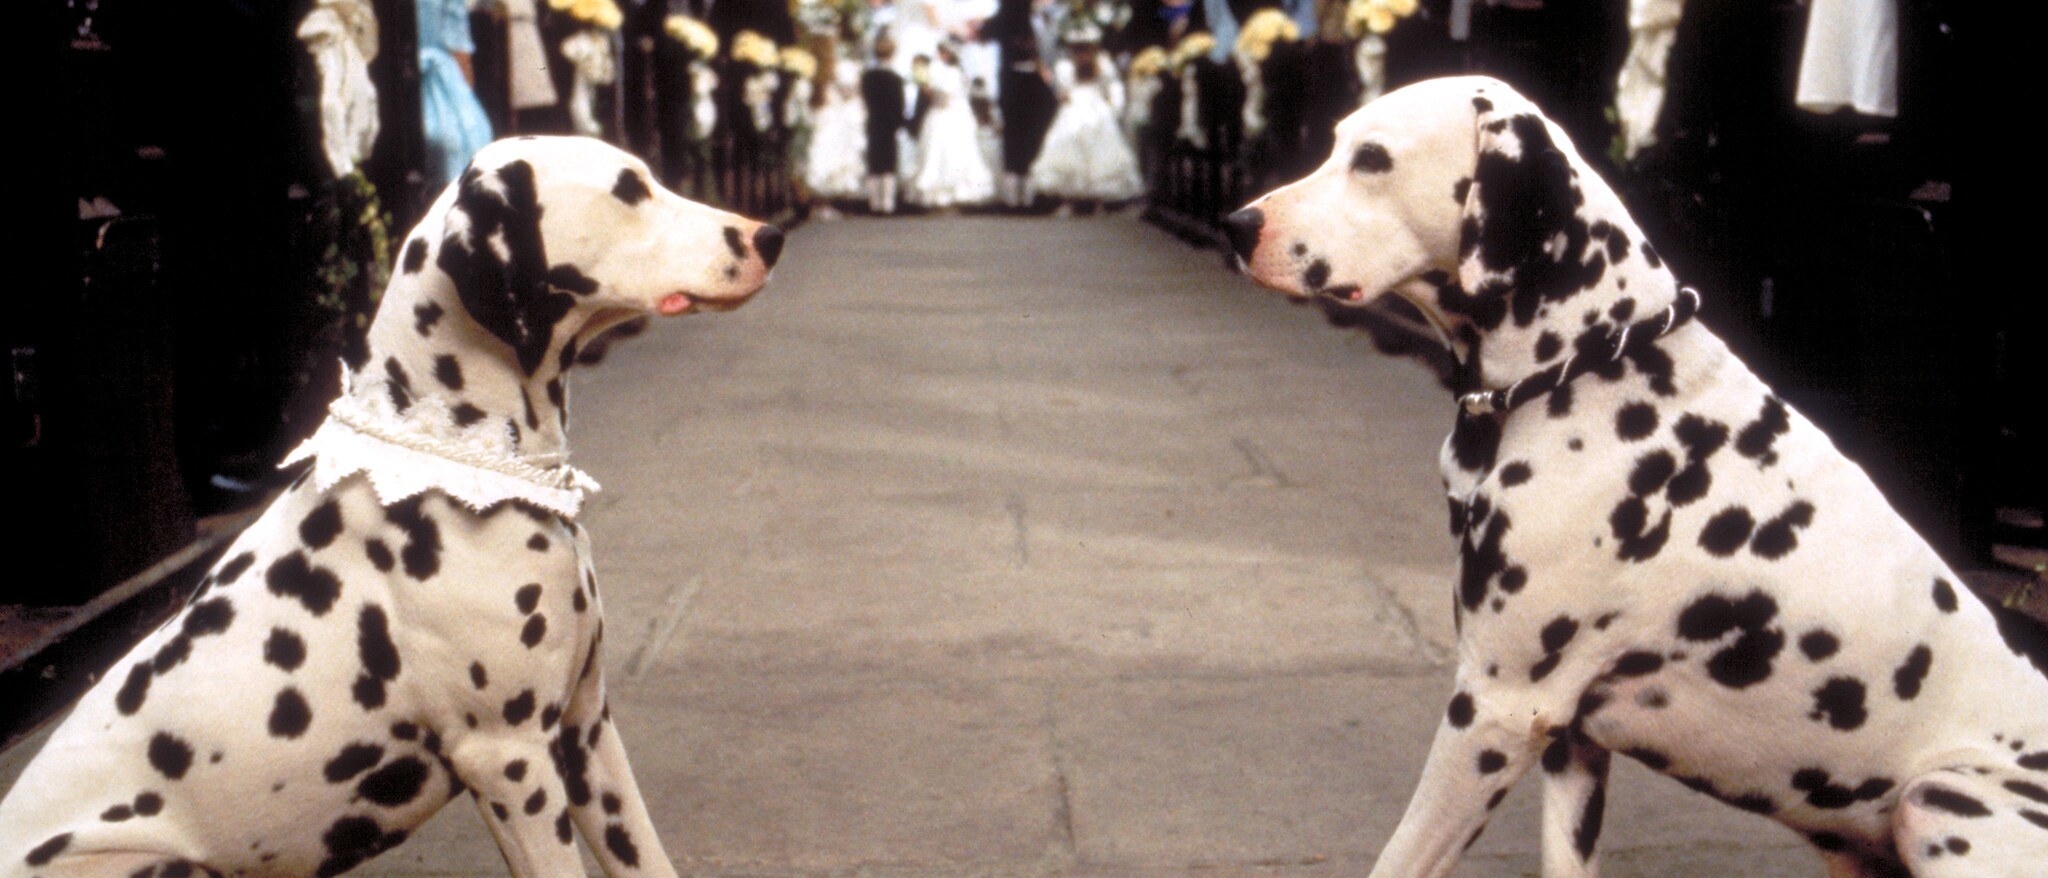 Two Dalmatians face each other at a wedding scene, one with a bow tie, the other with a veil